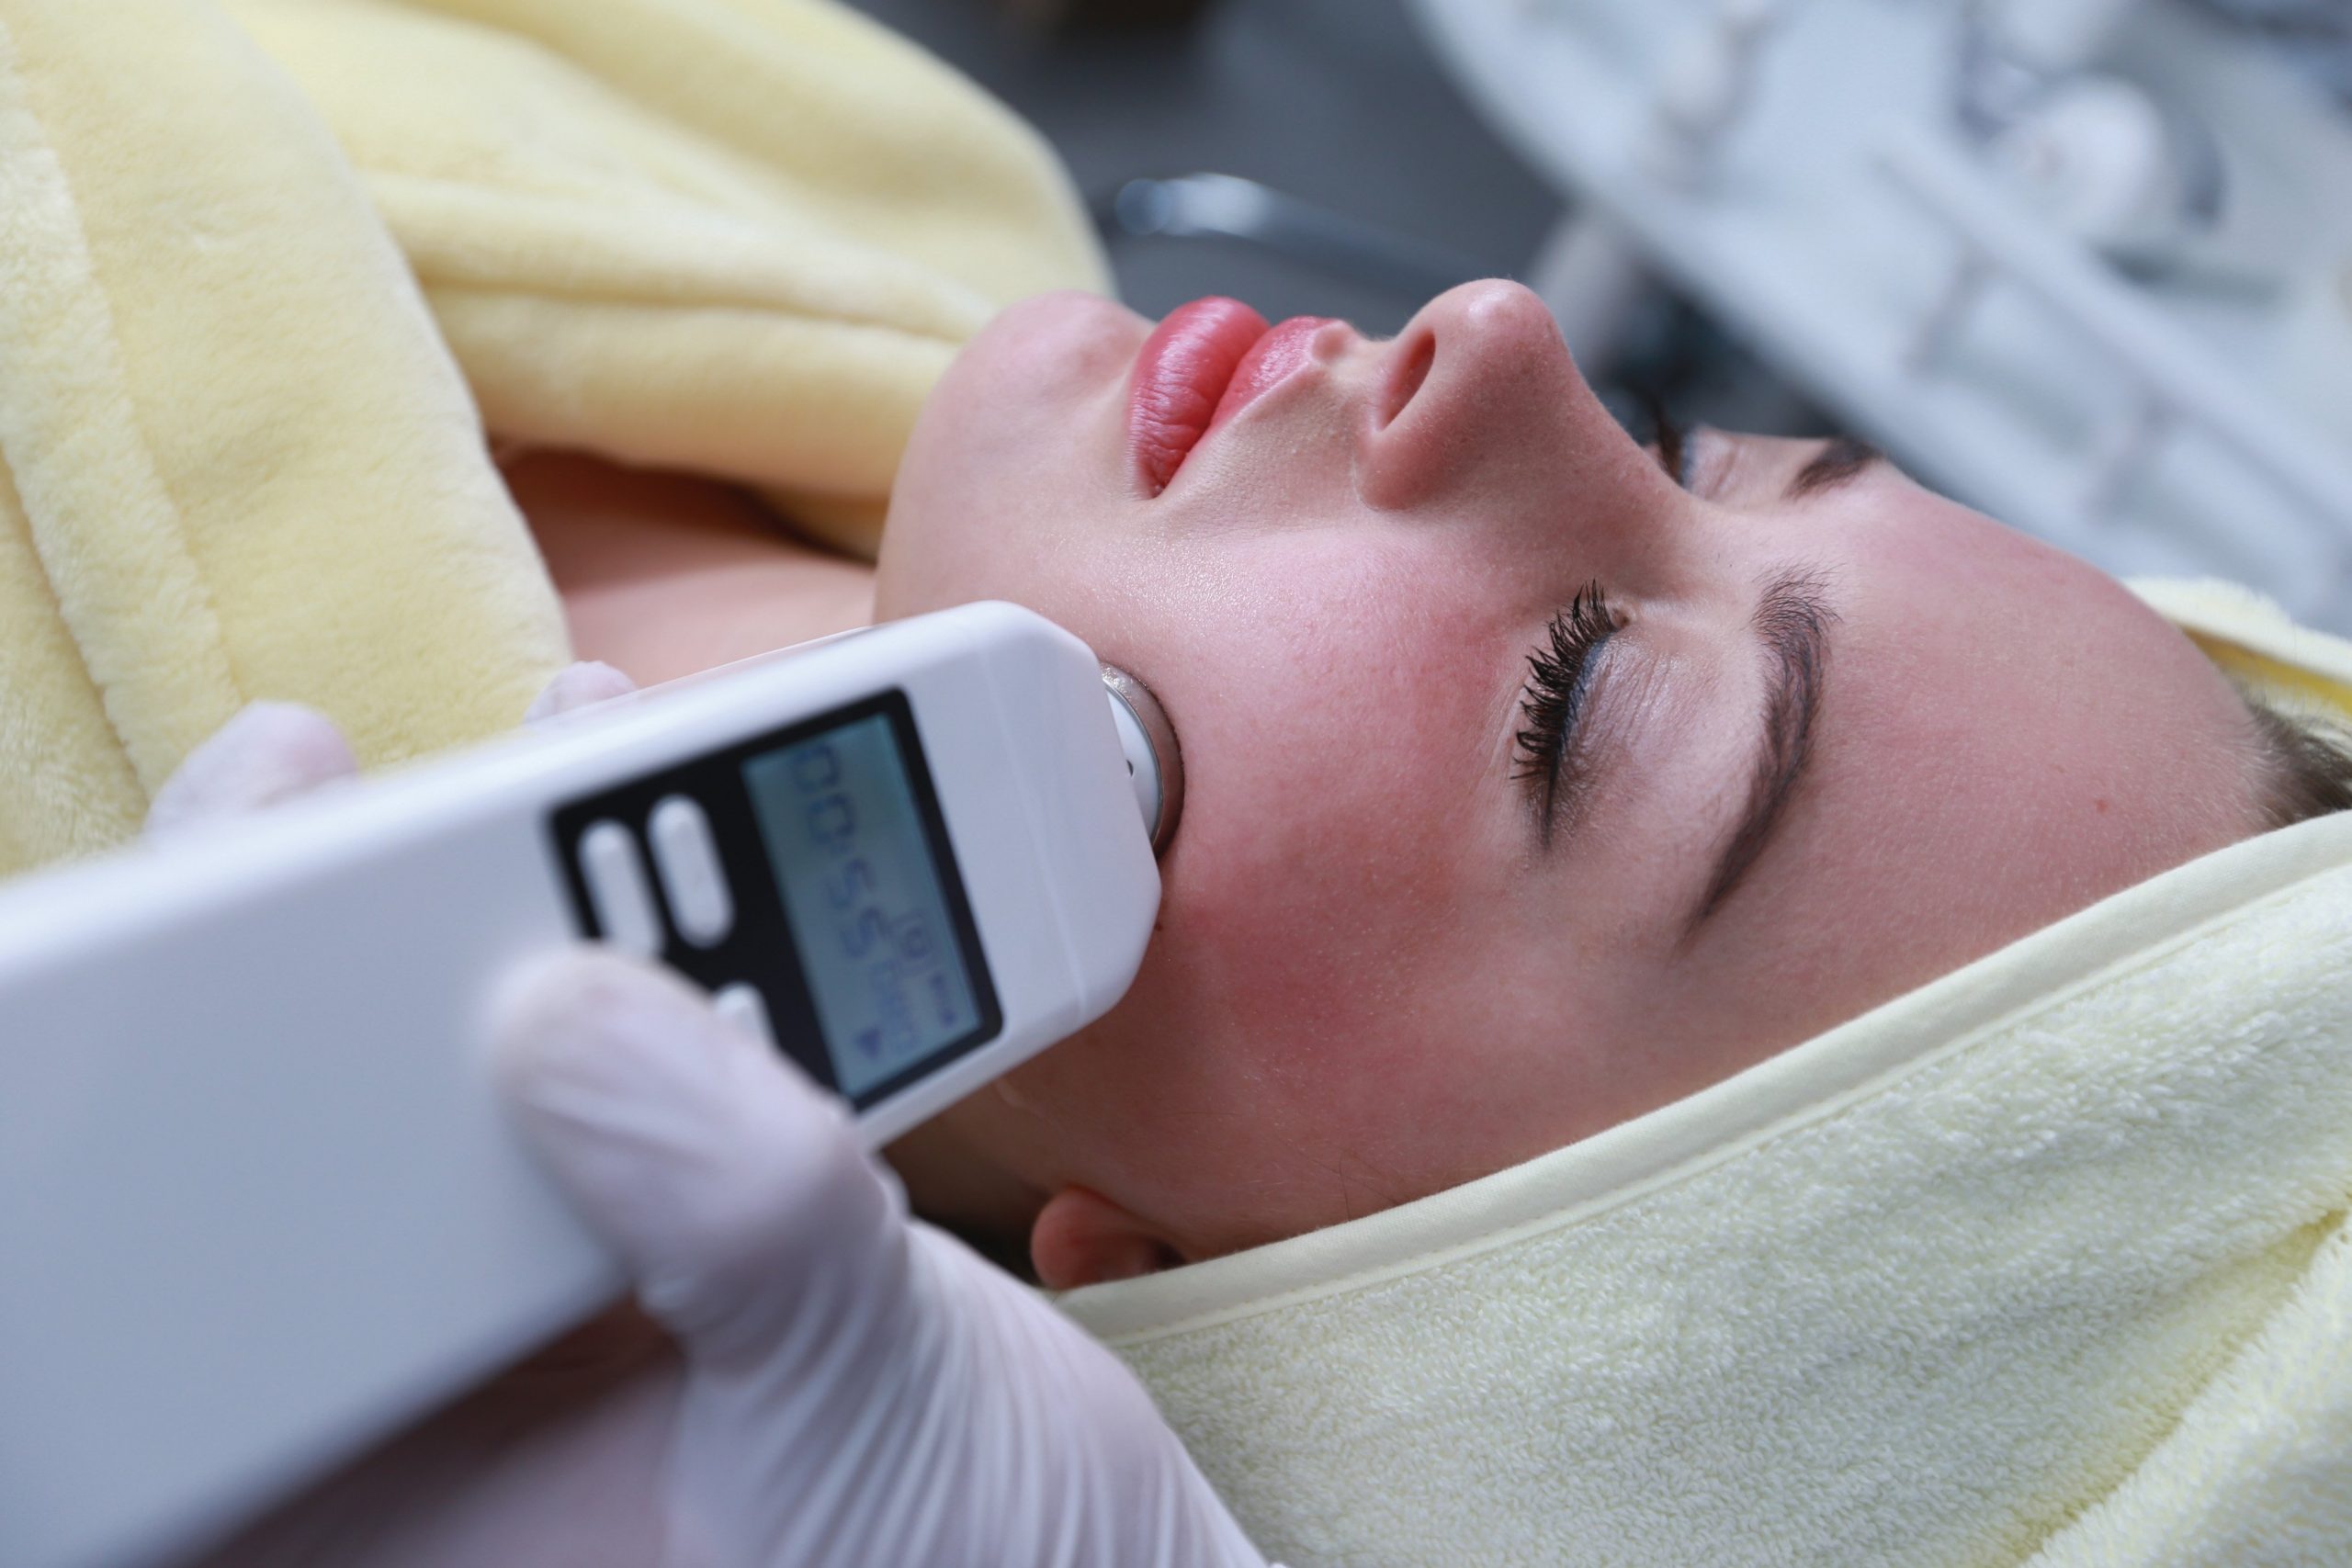 Ultrasonic cosmetology introduces a revolutionary approach to beauty, merging ultrasonic cosmetology with beauty and skincare. The benefits are vast, from enhancing skin quality to reducing wrinkles and fine lines.